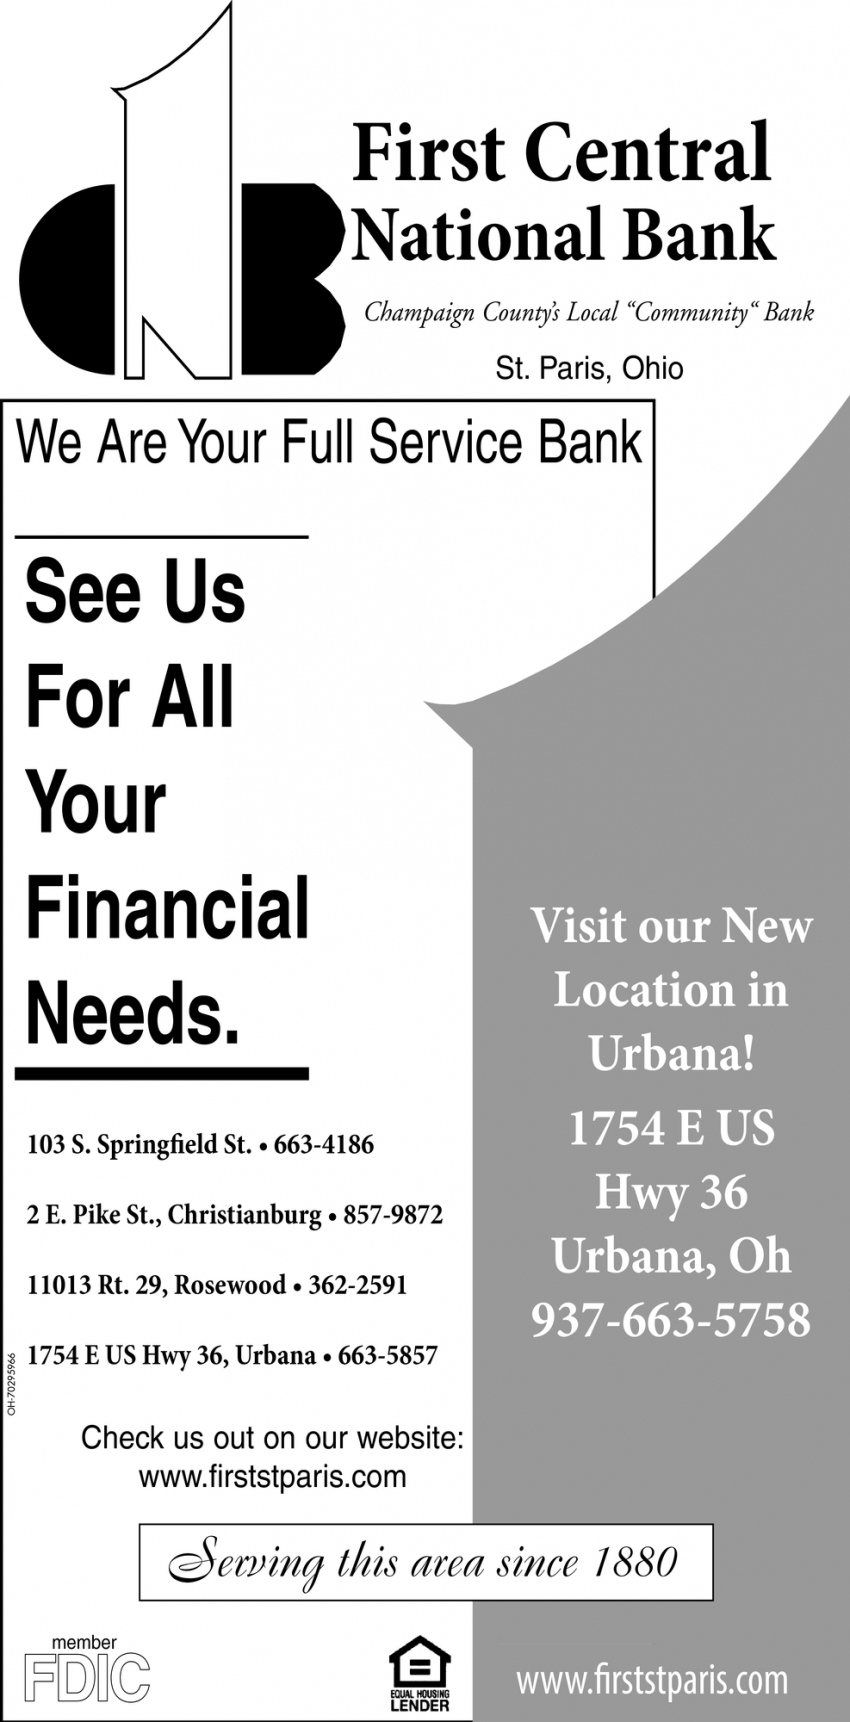 See Us For All Your Financial Needs